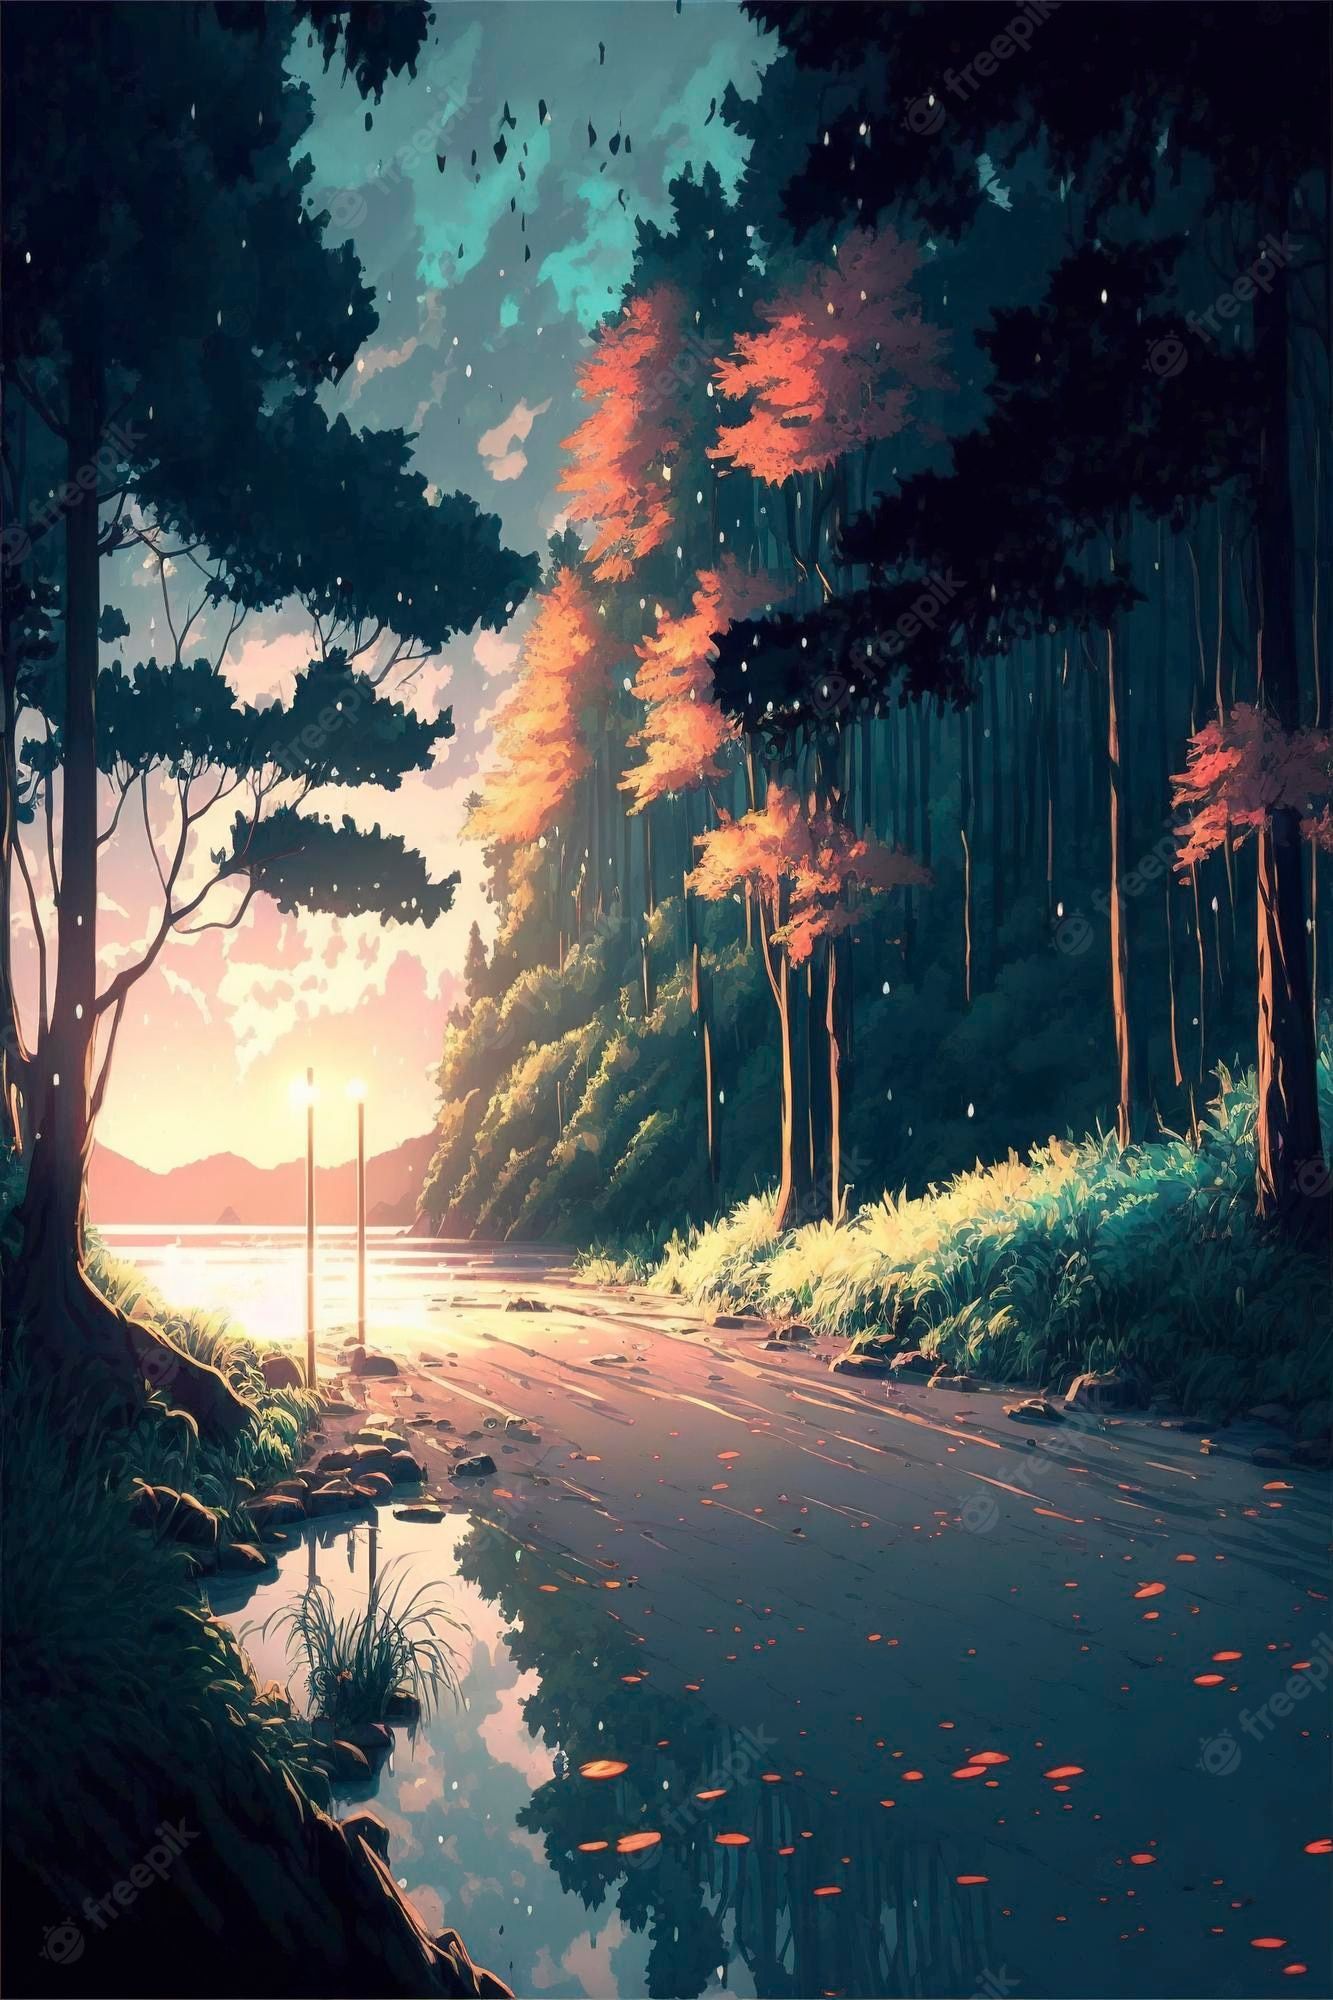 A painting of the forest at sunset - Anime sunset